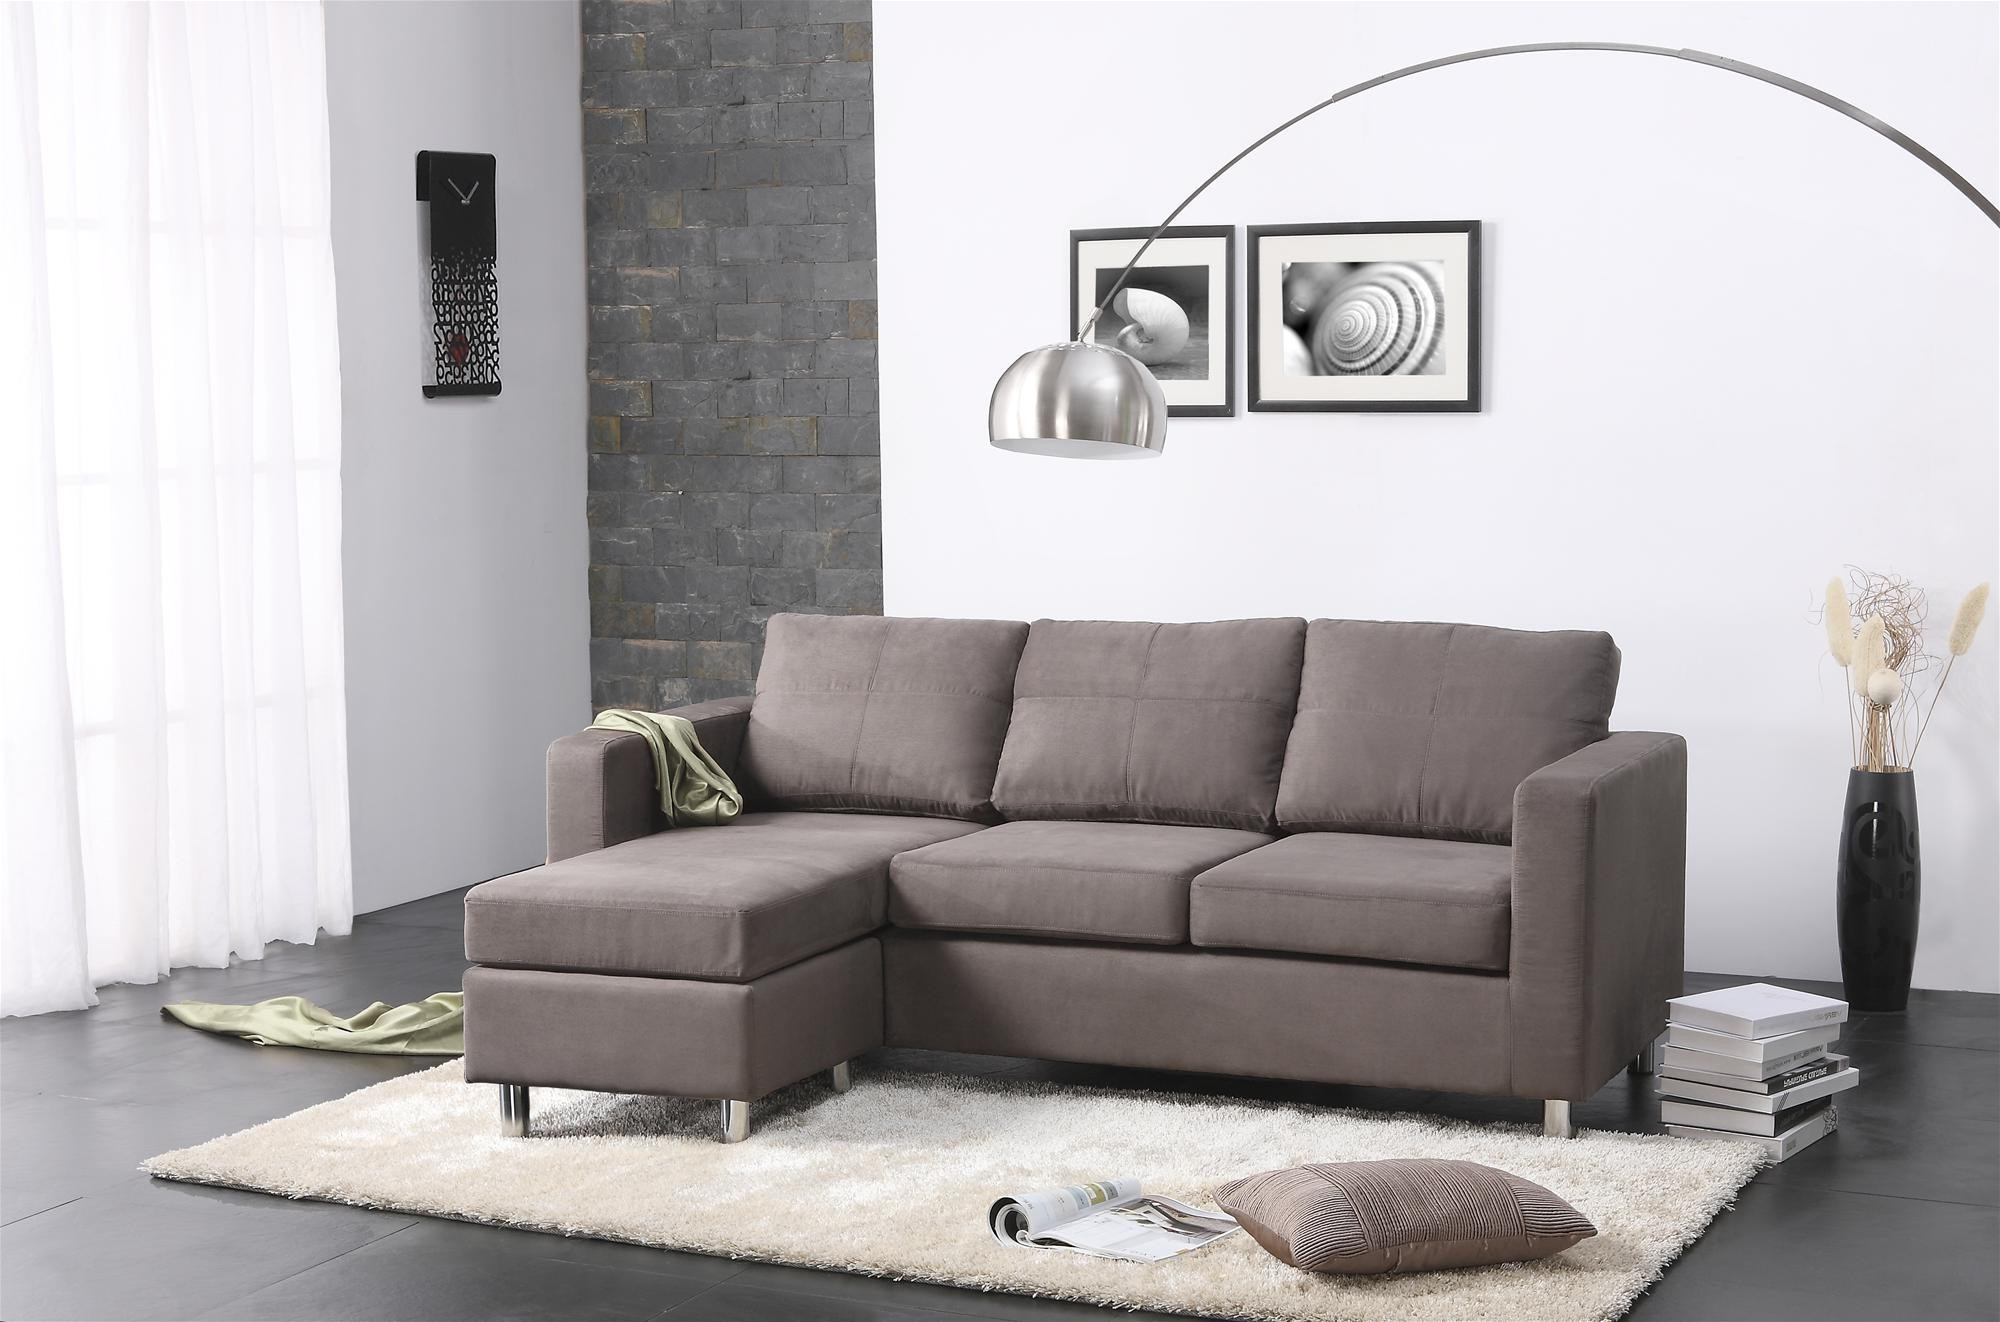 Couches For Small Living Room
 Living Rooms with Sectionals Sofa for Small Living Room